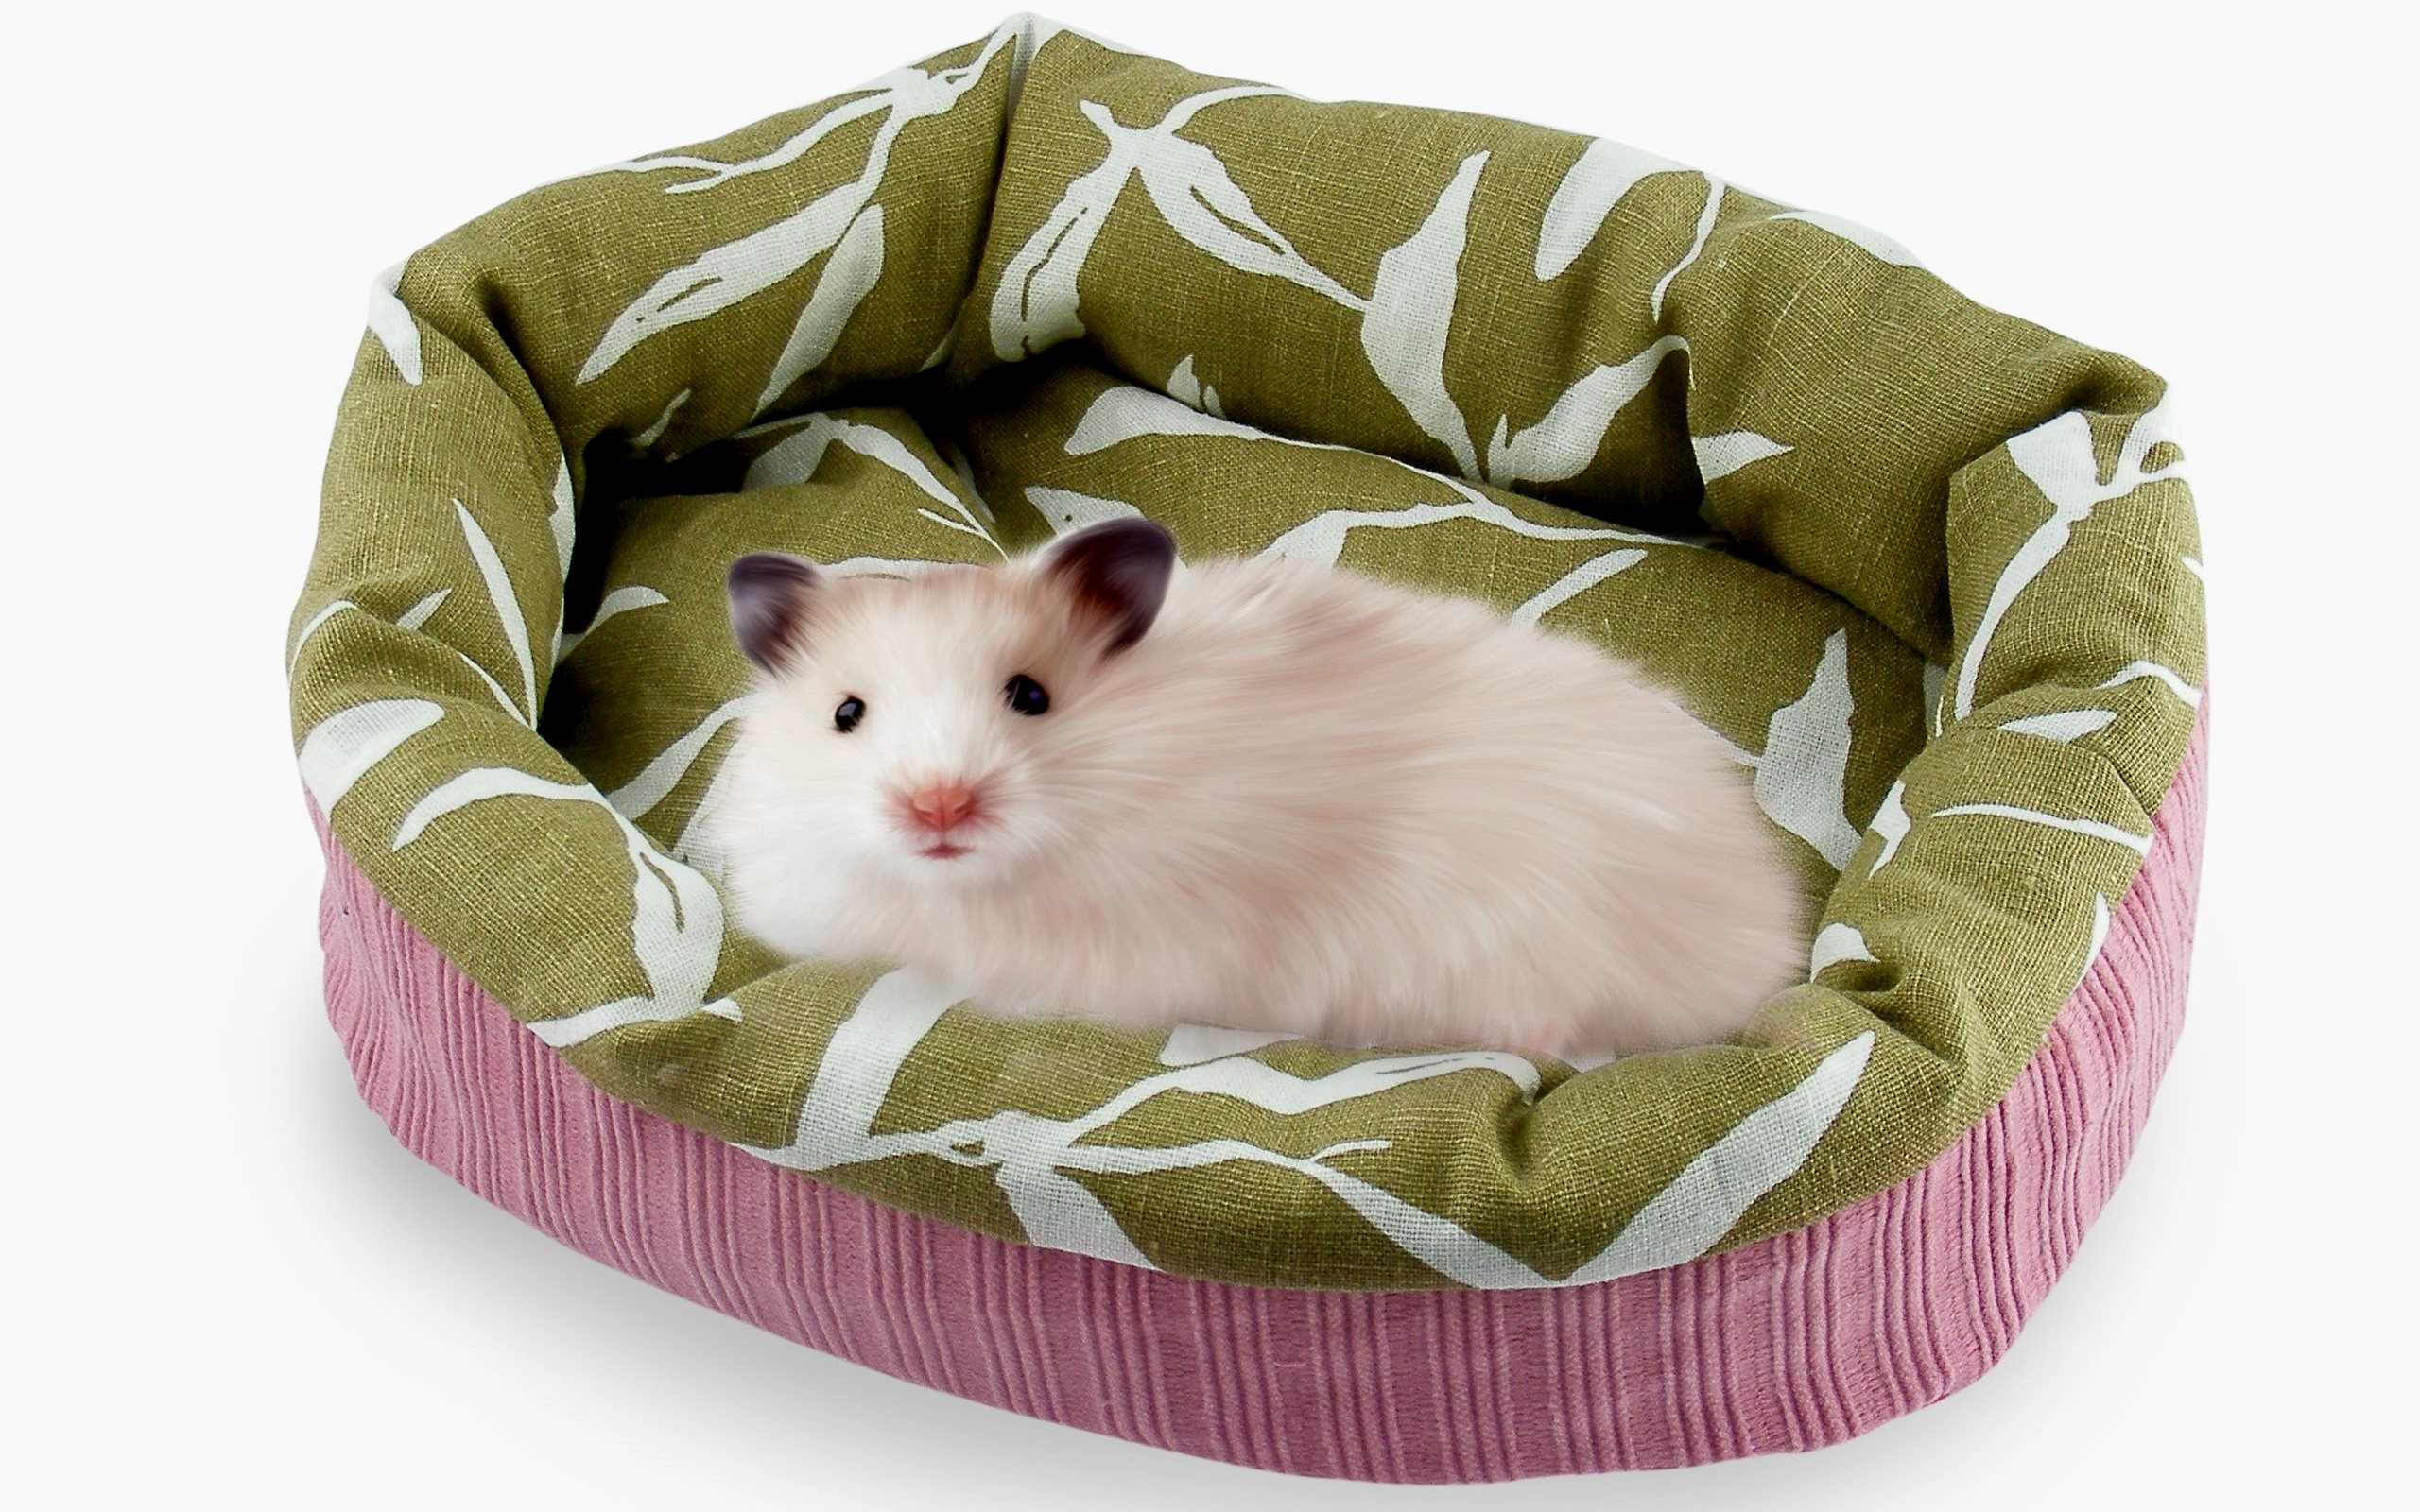 Rating of the best beds for ferrets and rodents for 2022